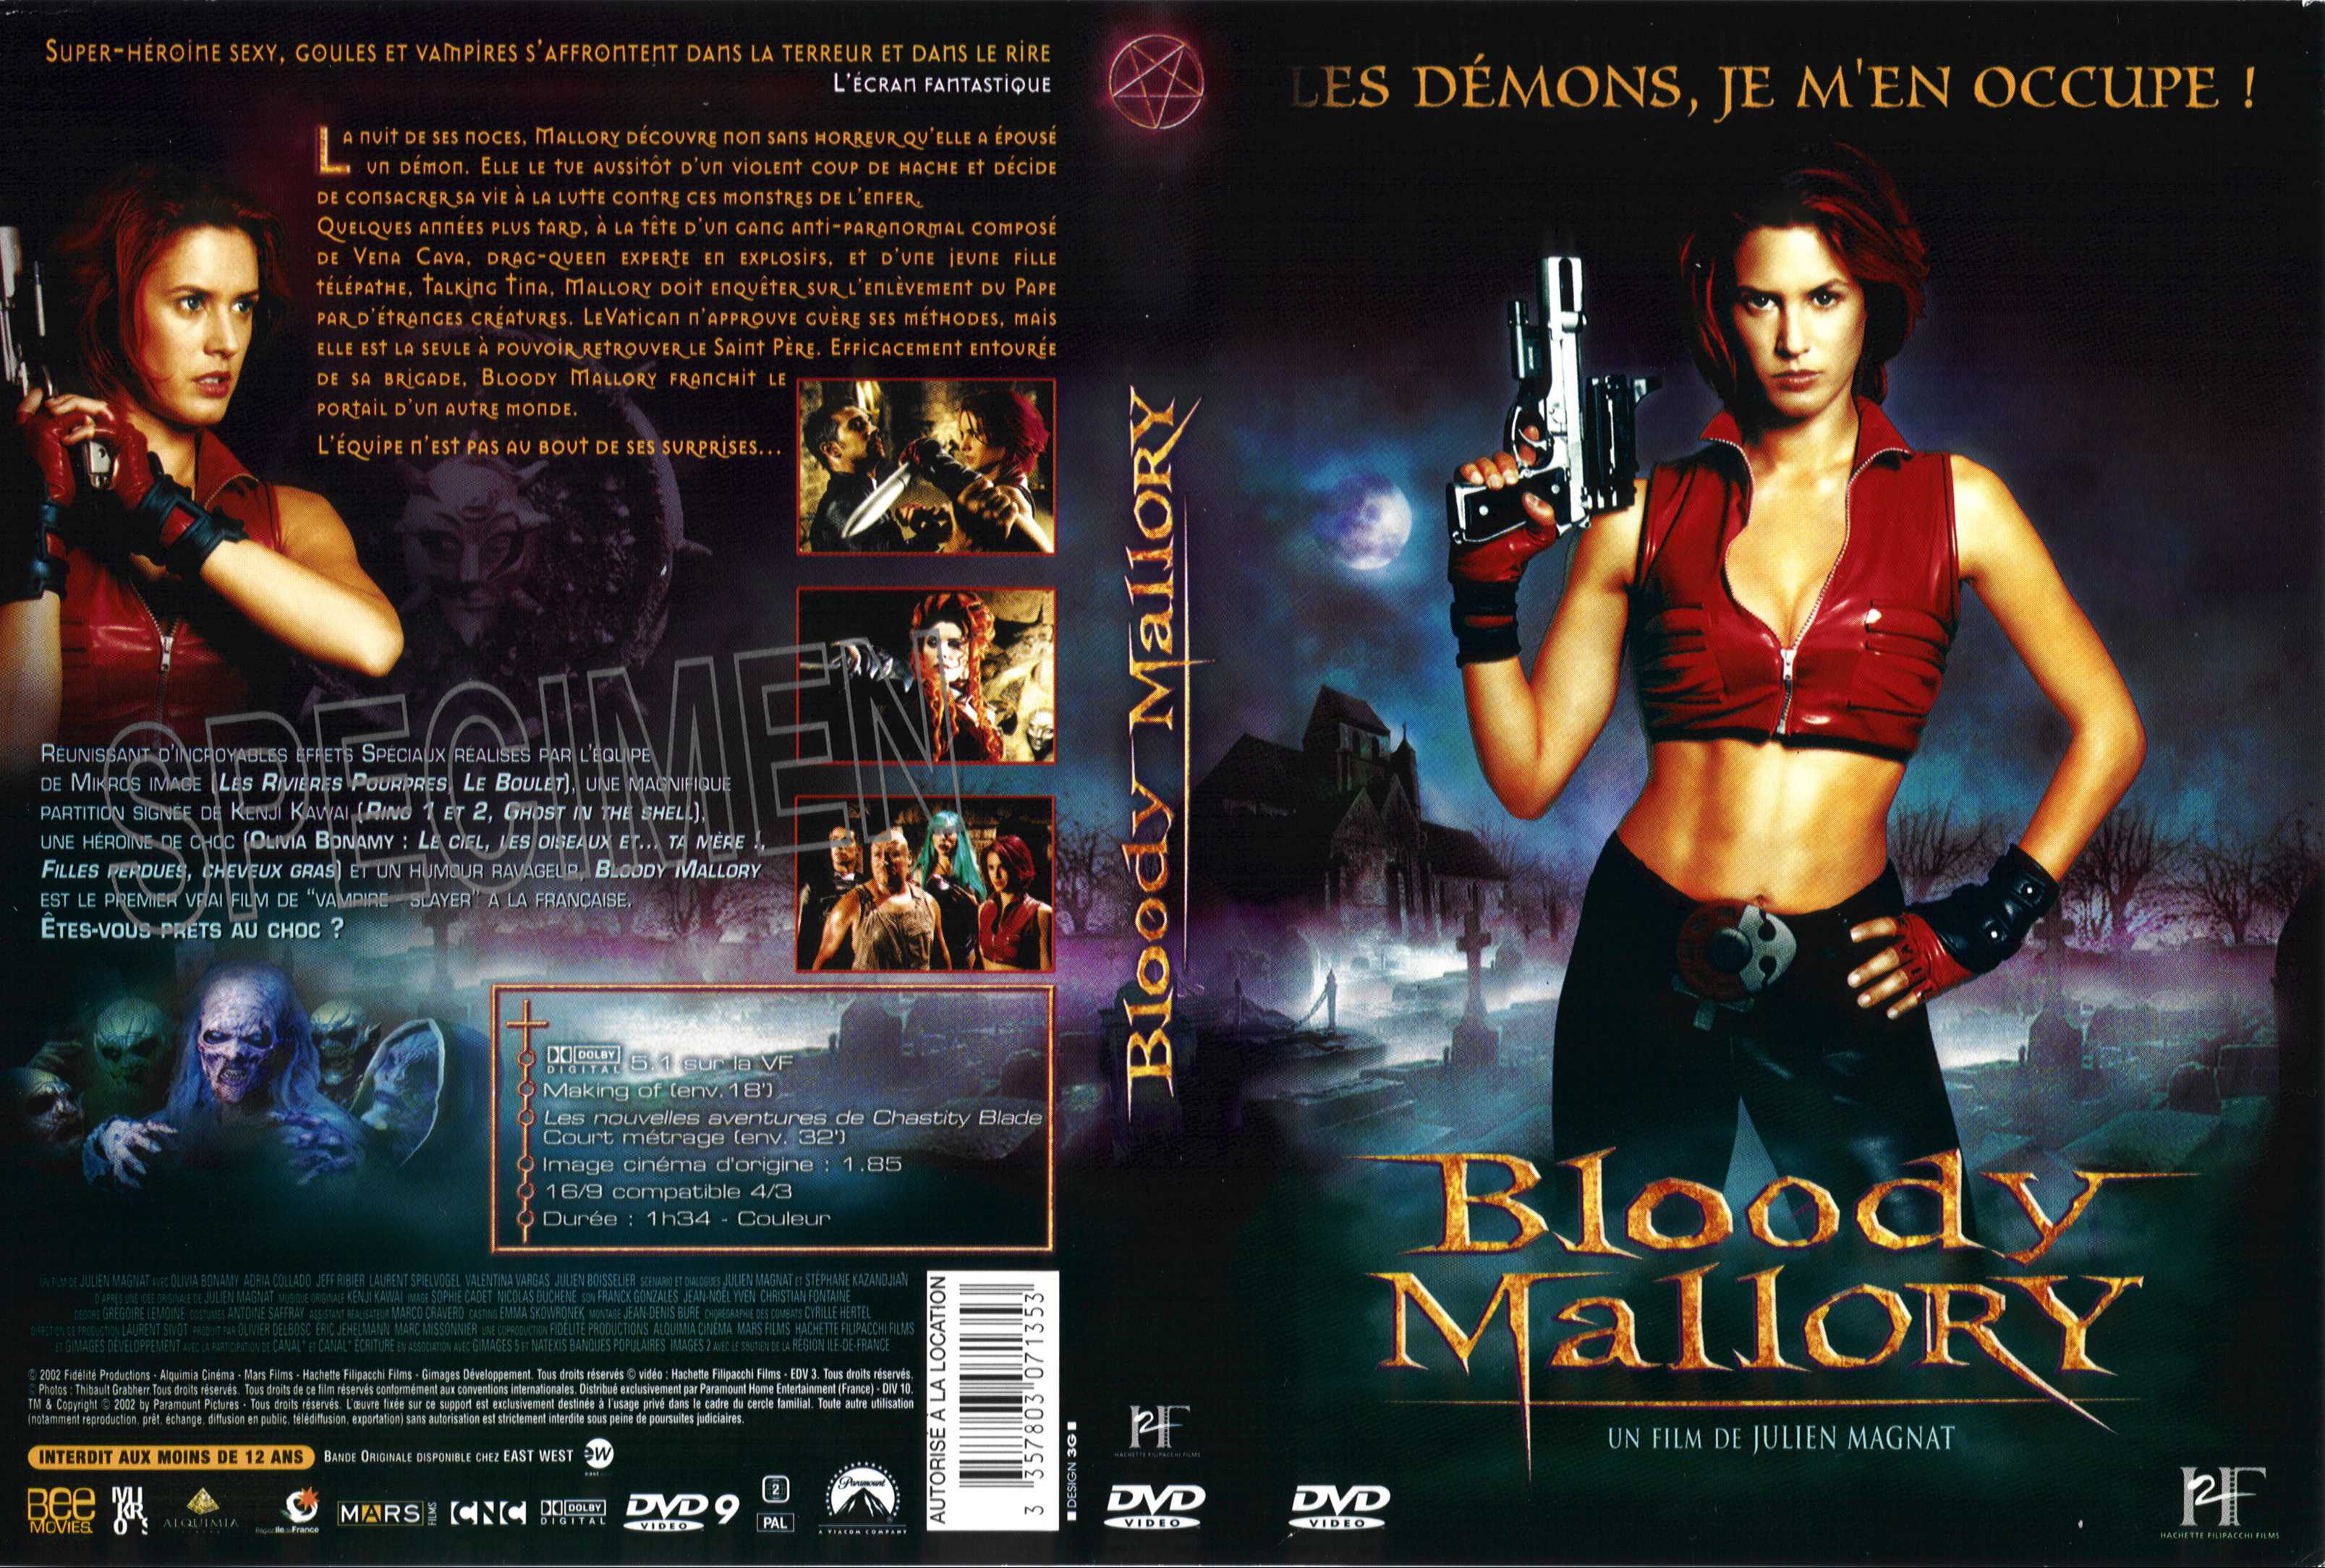 Jaquette DVD Bloody Mallory